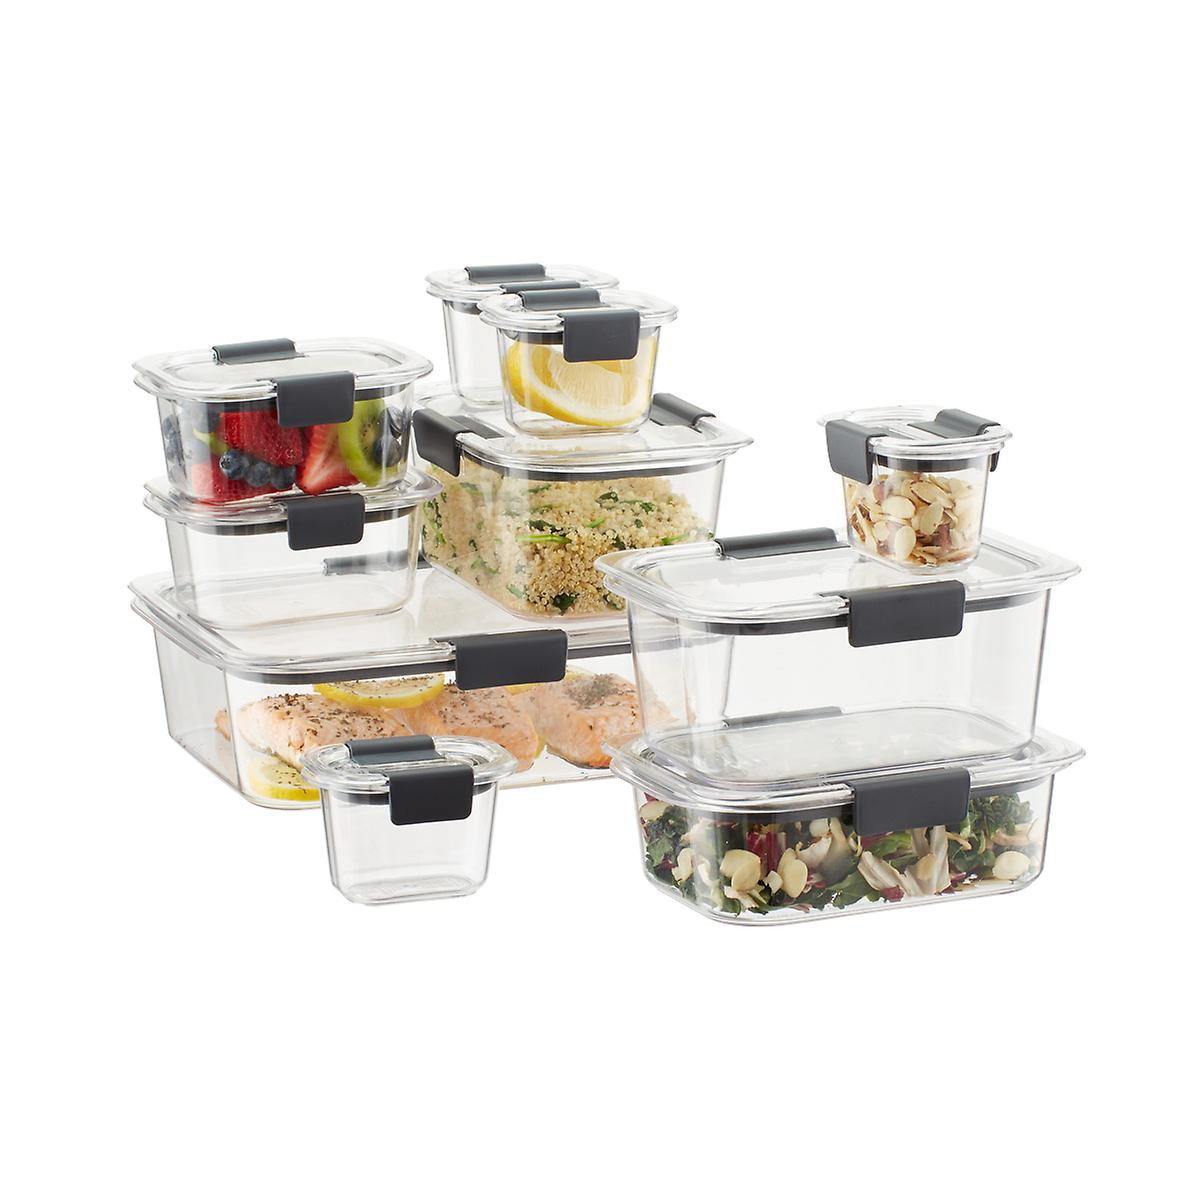 Rubbermaid Kitchen Storage
 Rubbermaid Brilliance Food Storage Containers Set of 20